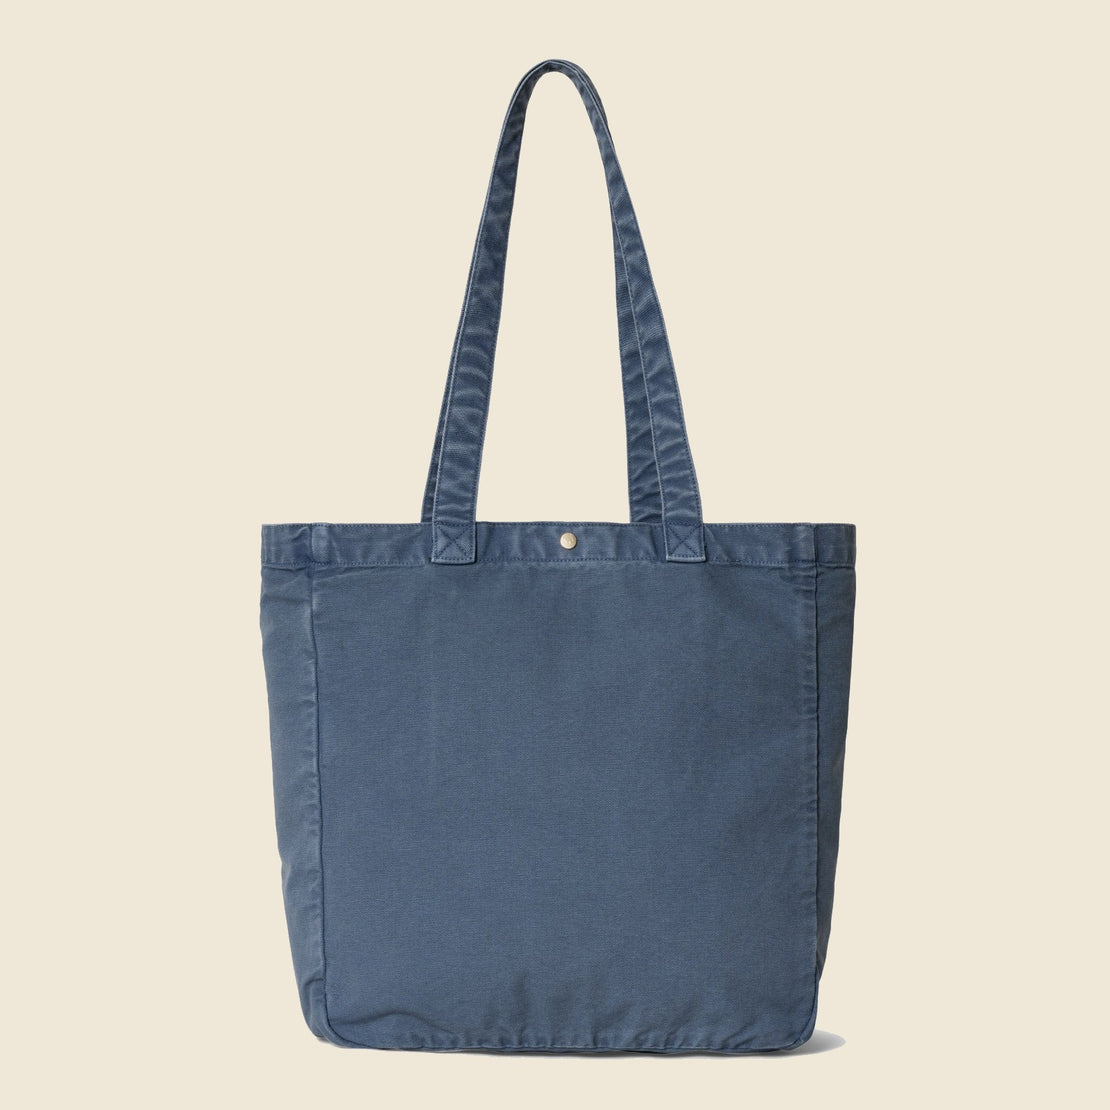 Bayfield Tote - Storm Blue - Carhartt WIP - STAG Provisions - W - Accessories - Bag